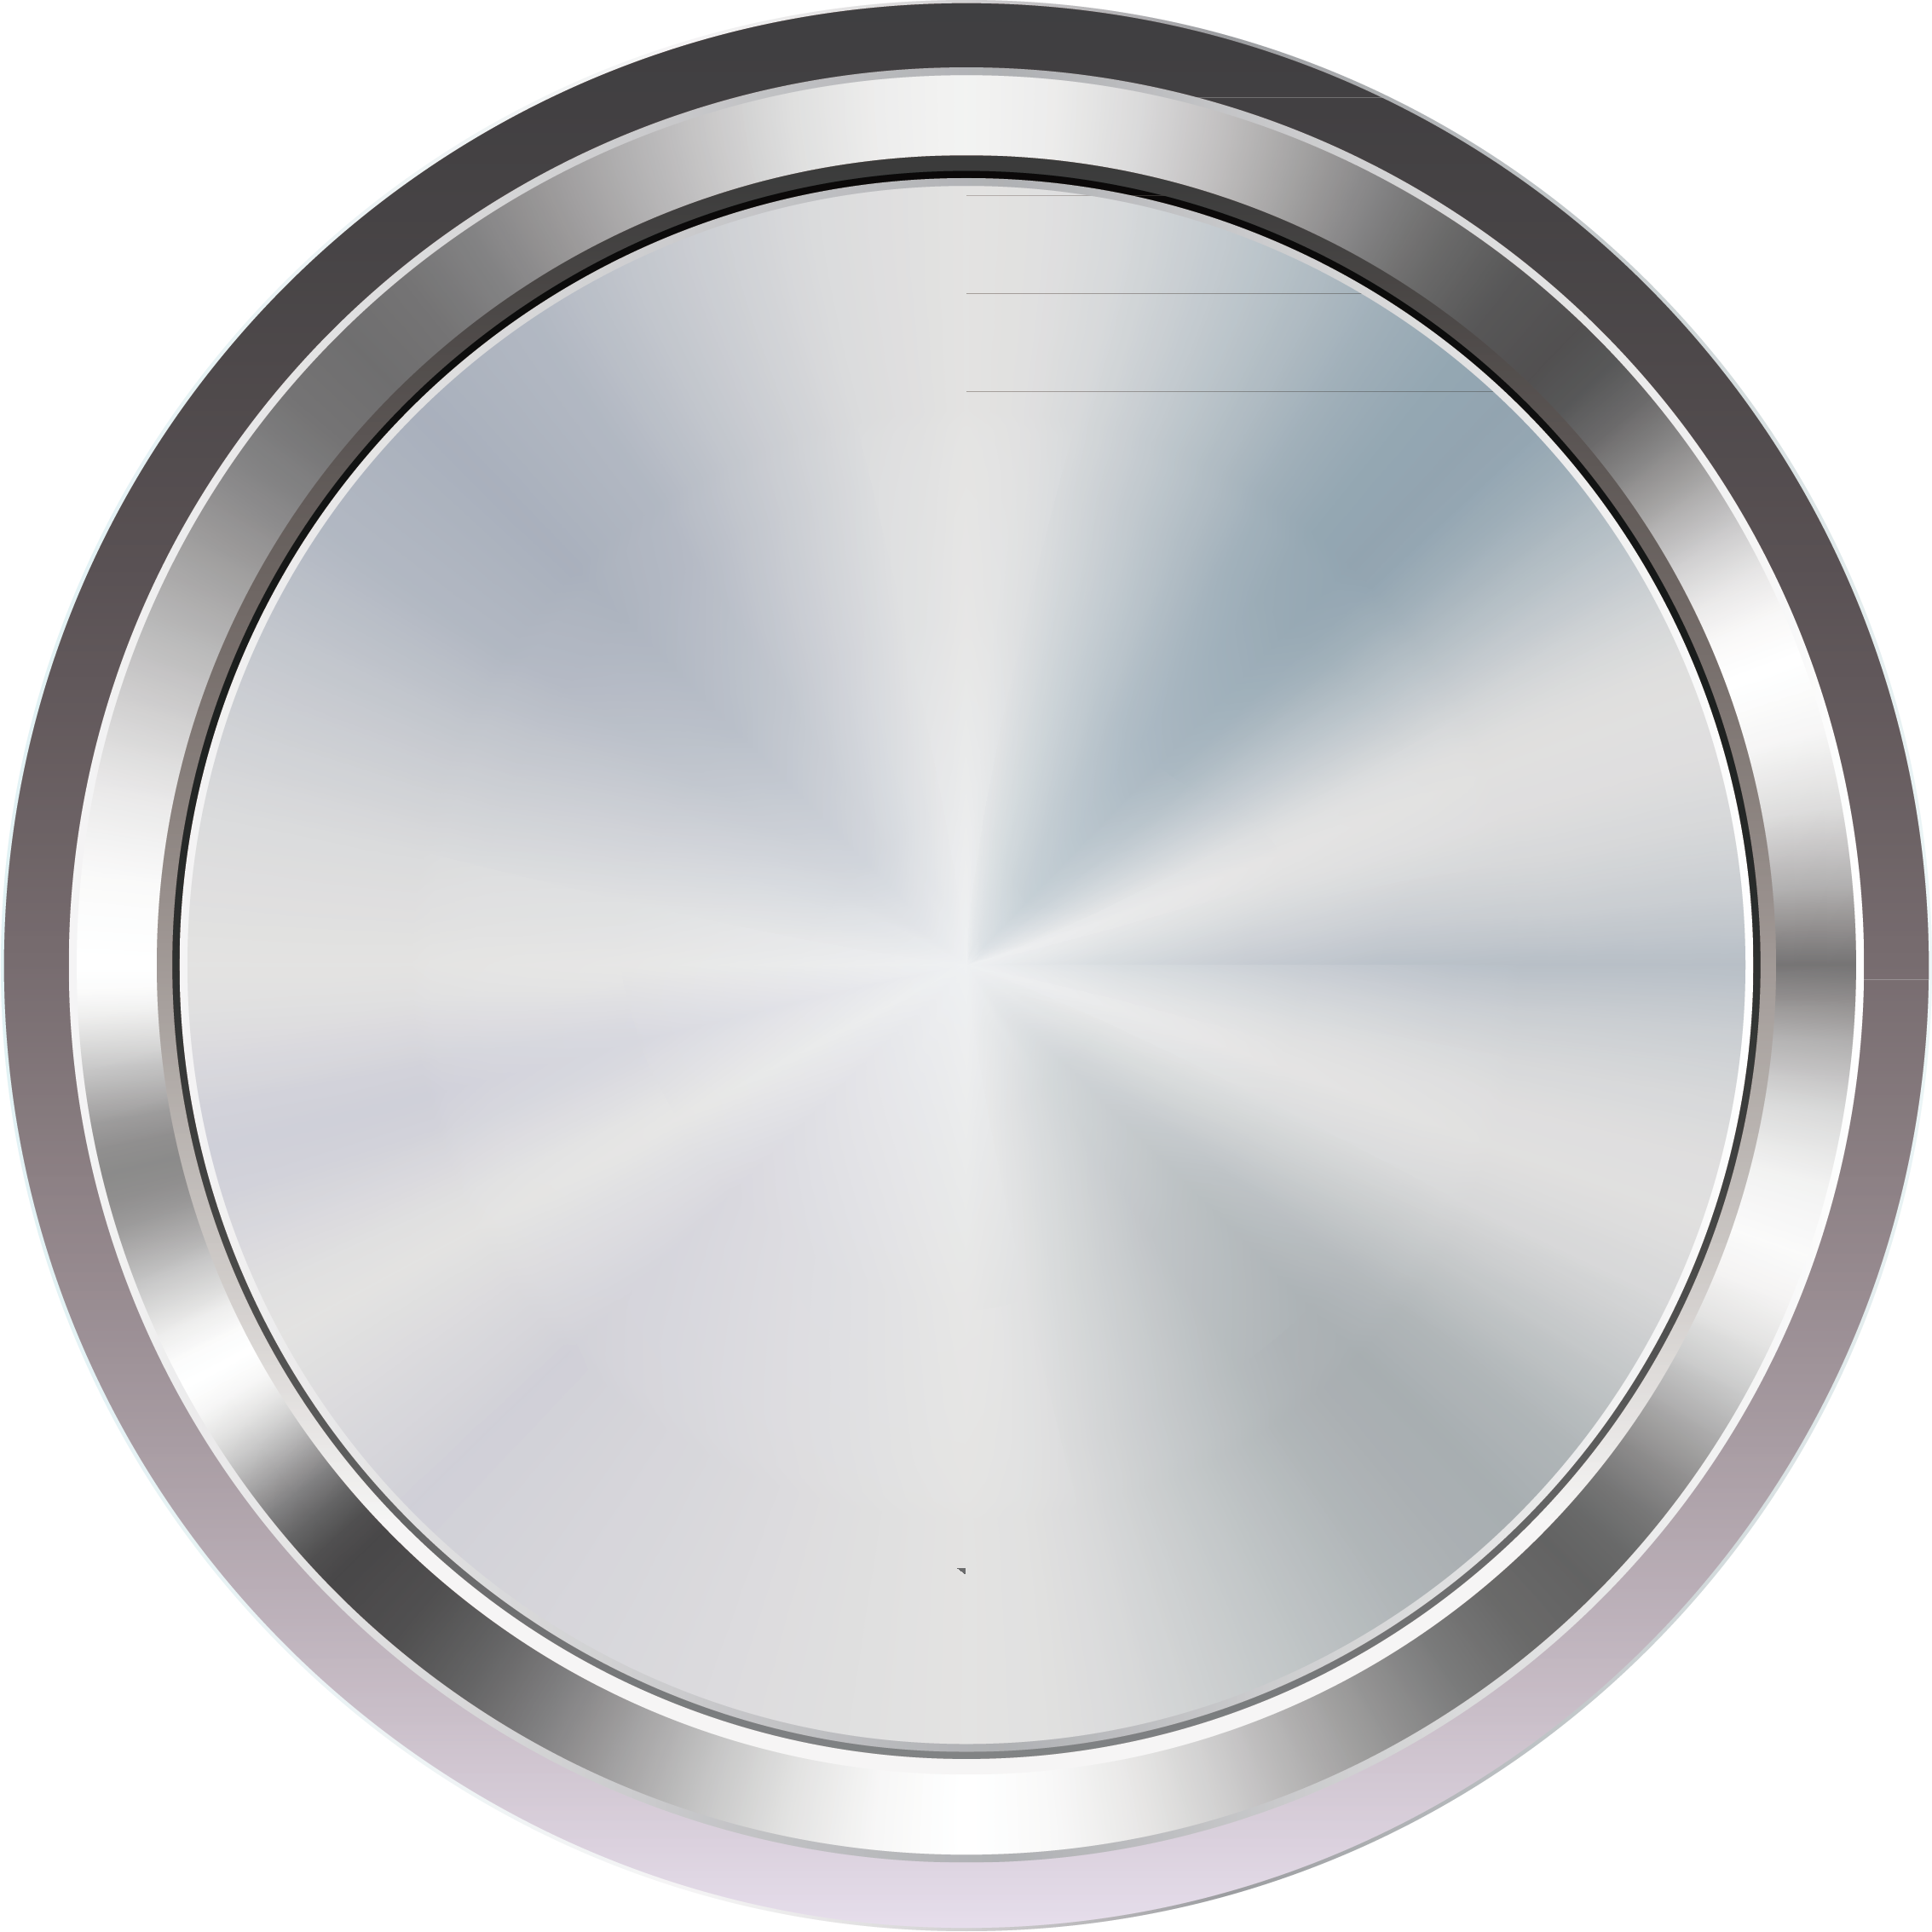 transparent button png 10 free Cliparts | Download images ...